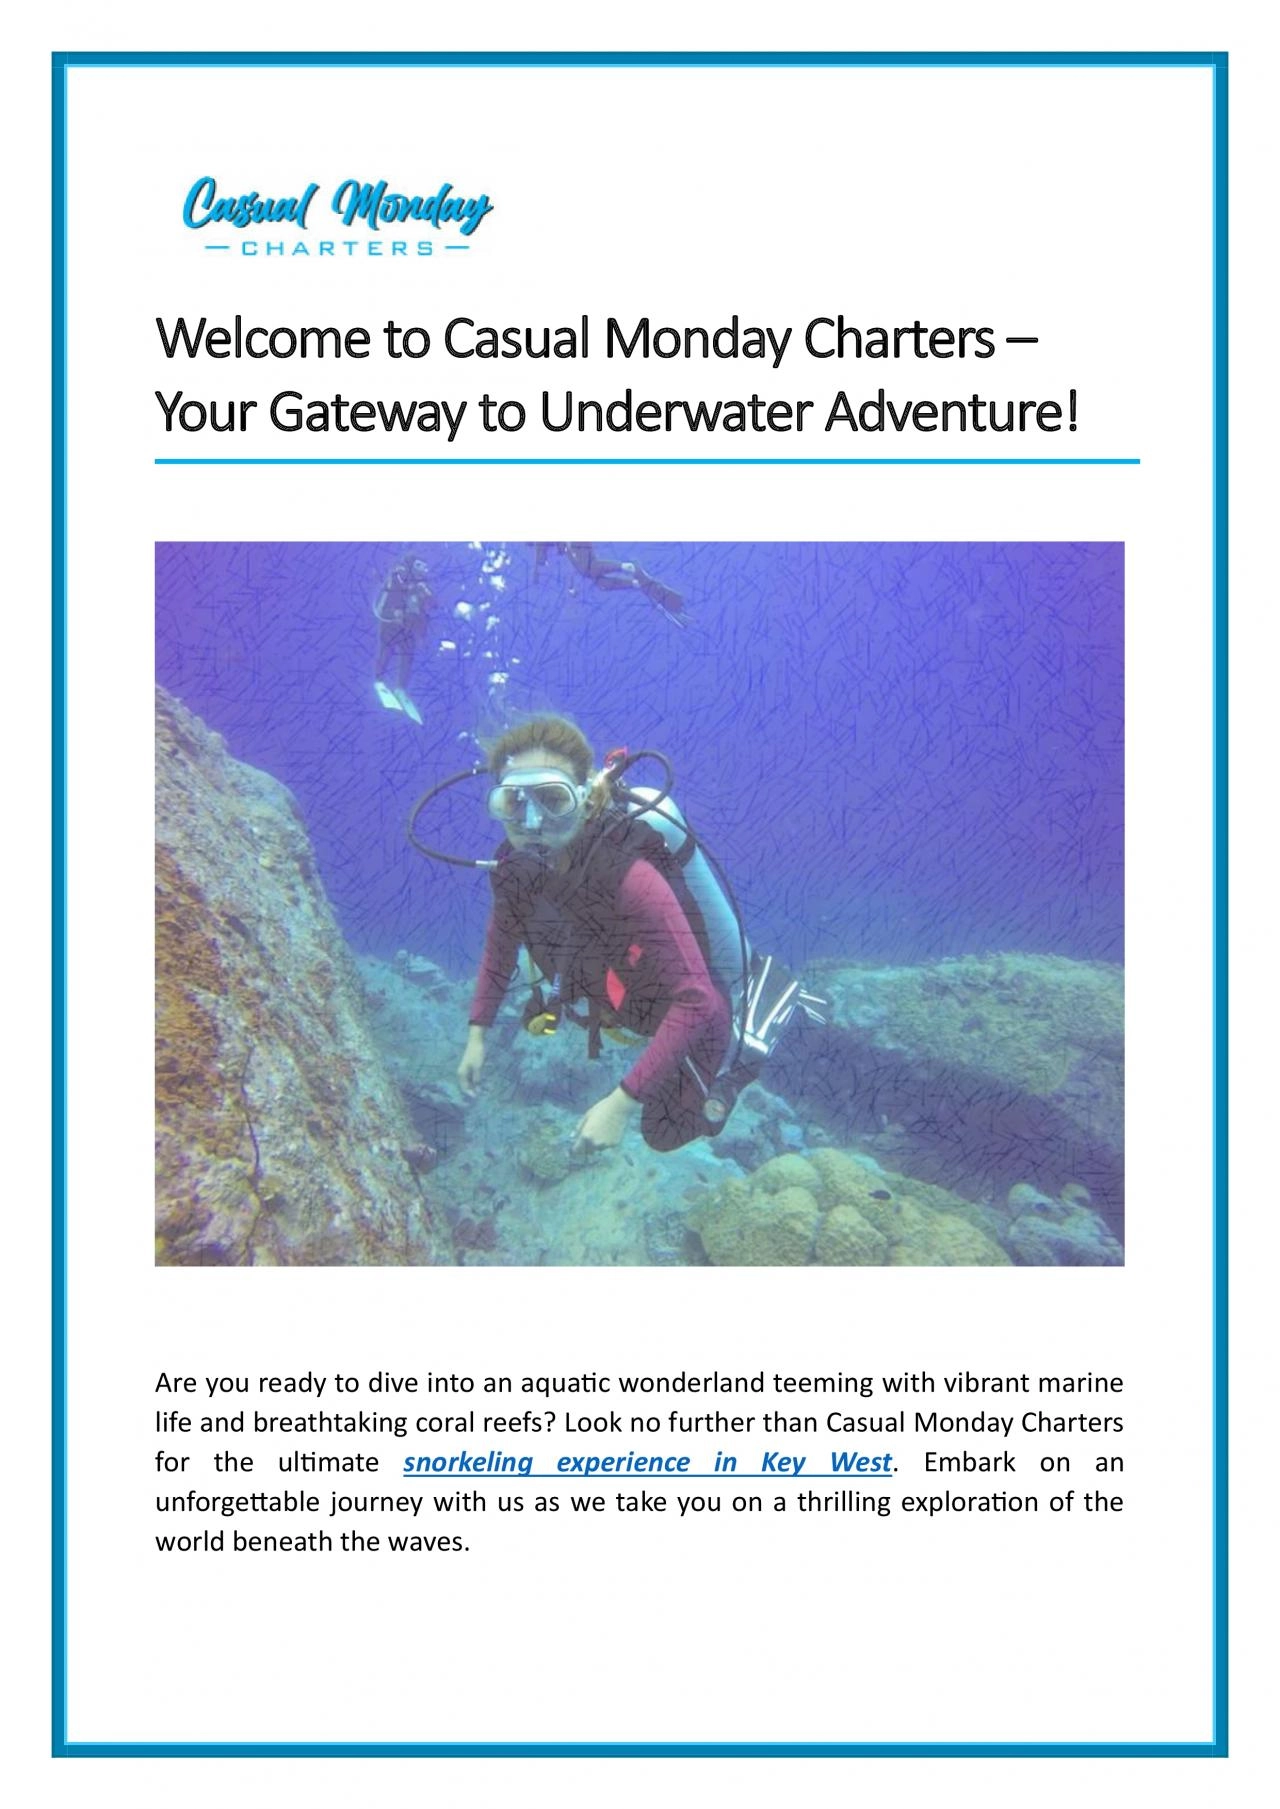 Welcome to Casual Monday Charters – Your Gateway to Underwater Adventure!